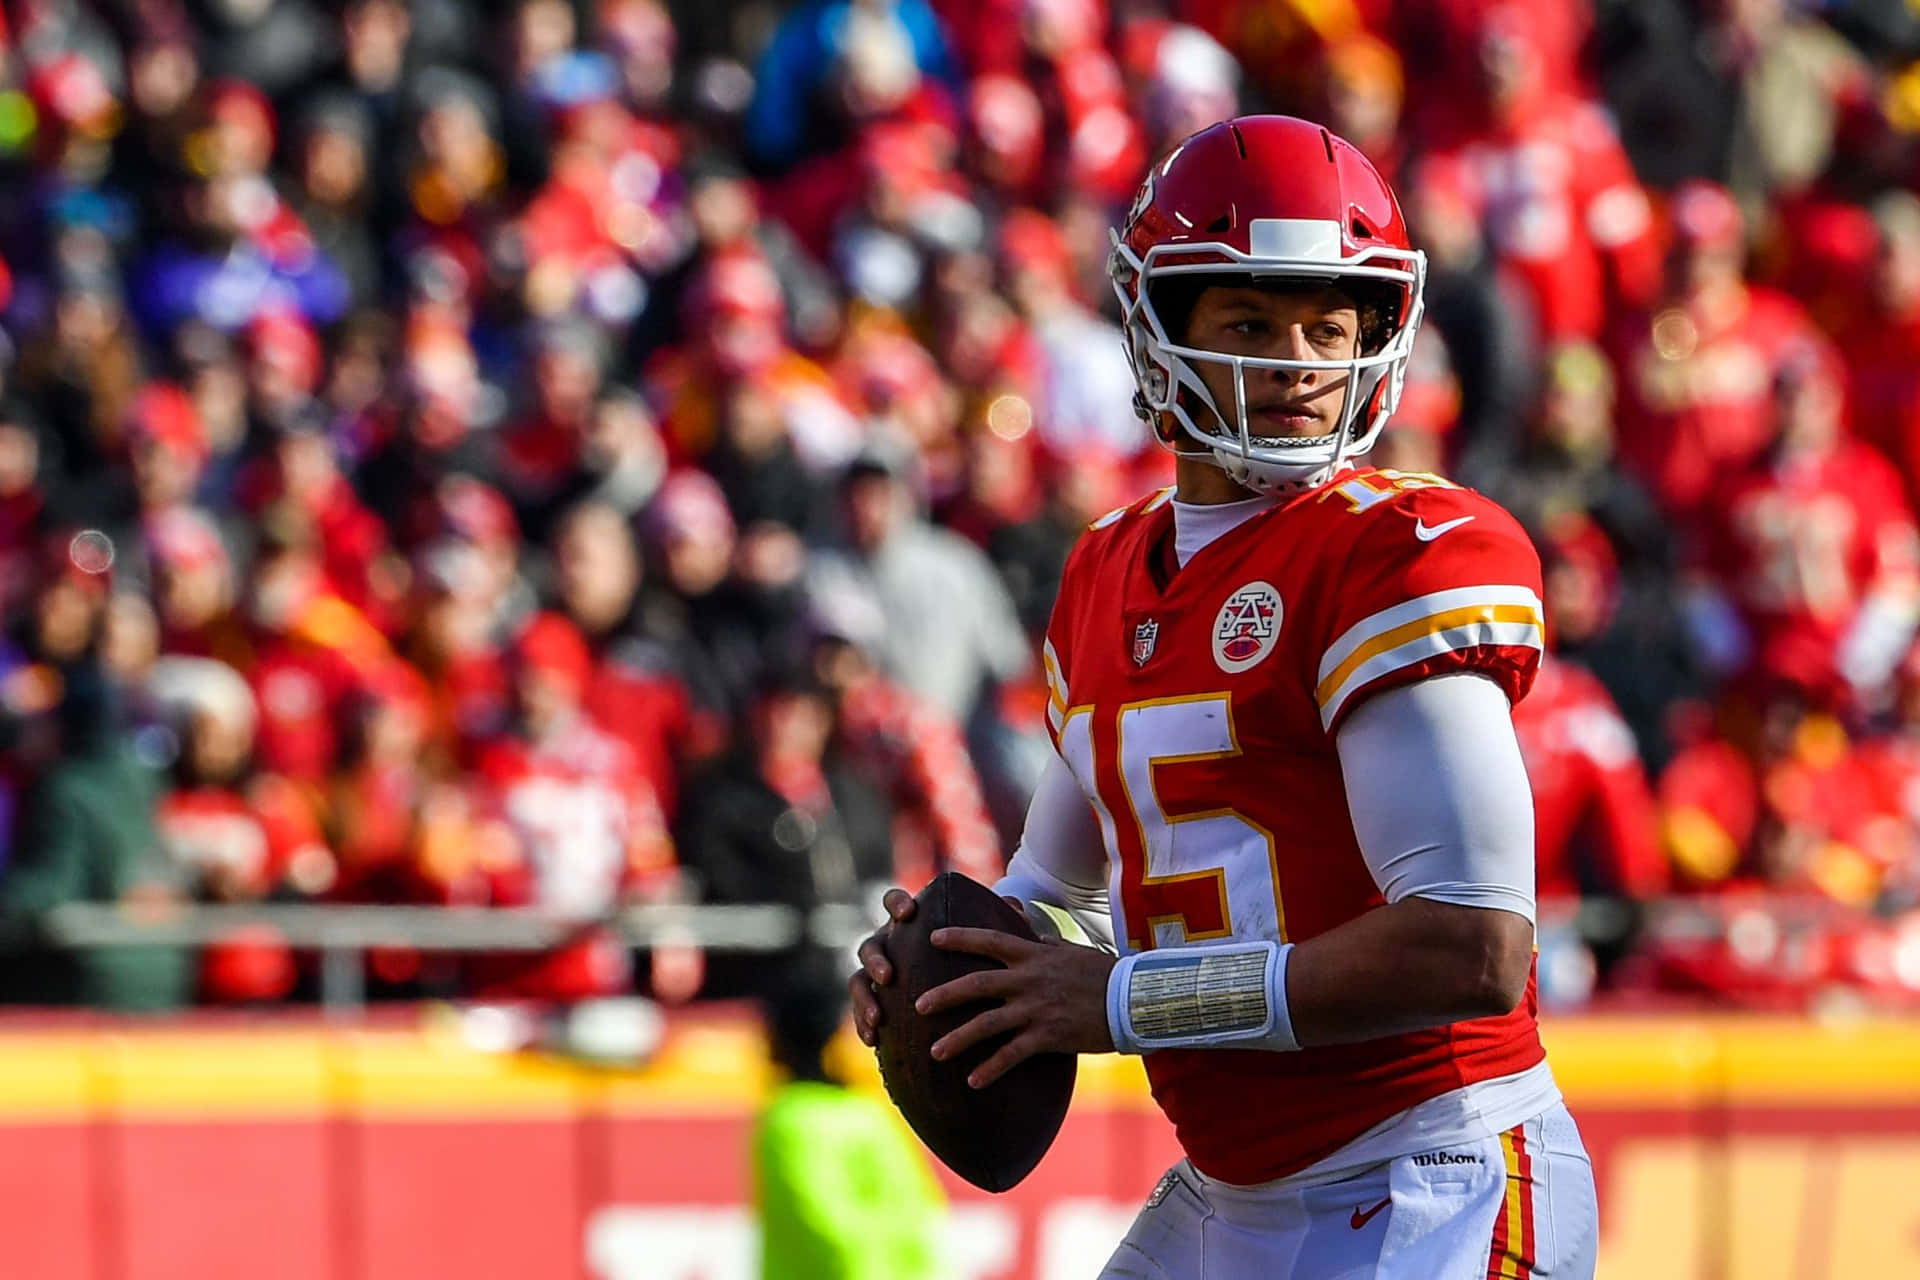 Patrick Mahomes in action during a game